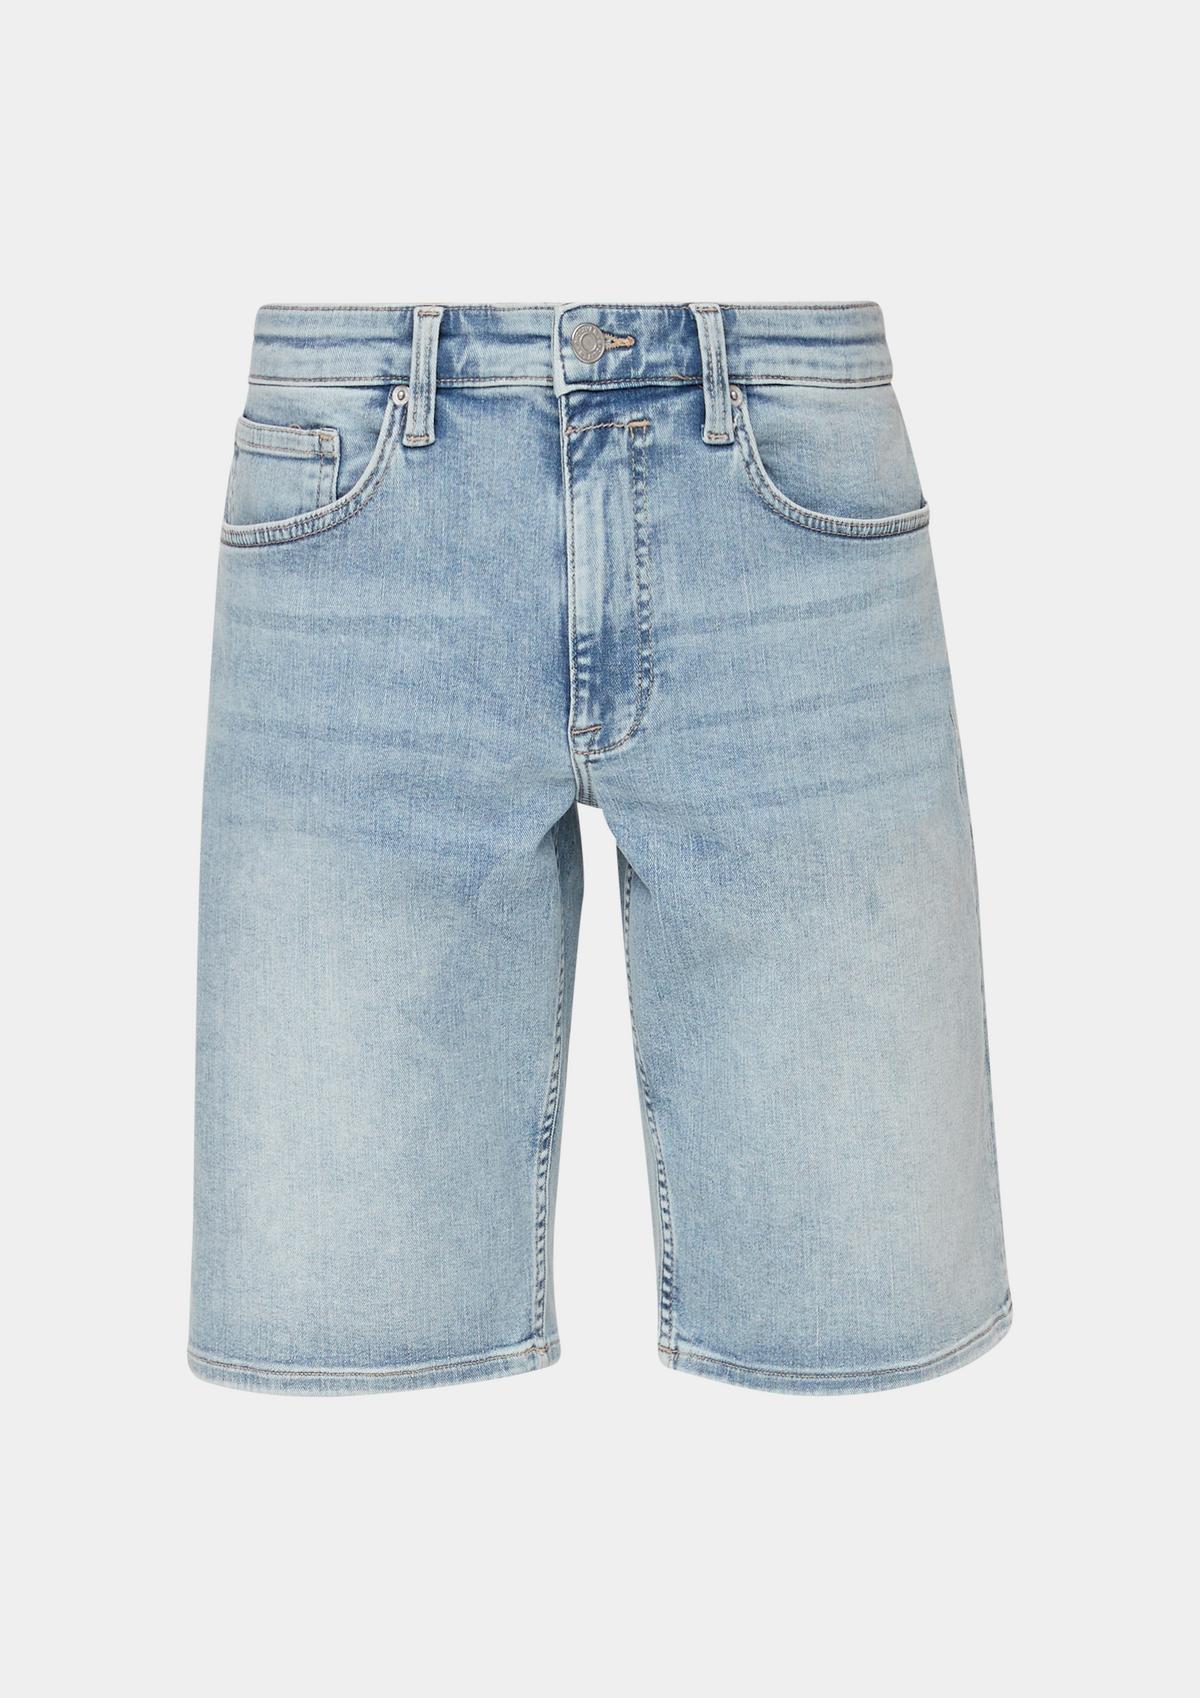 s.Oliver Jeans-Shorts / Regular Fit / Mid Rise